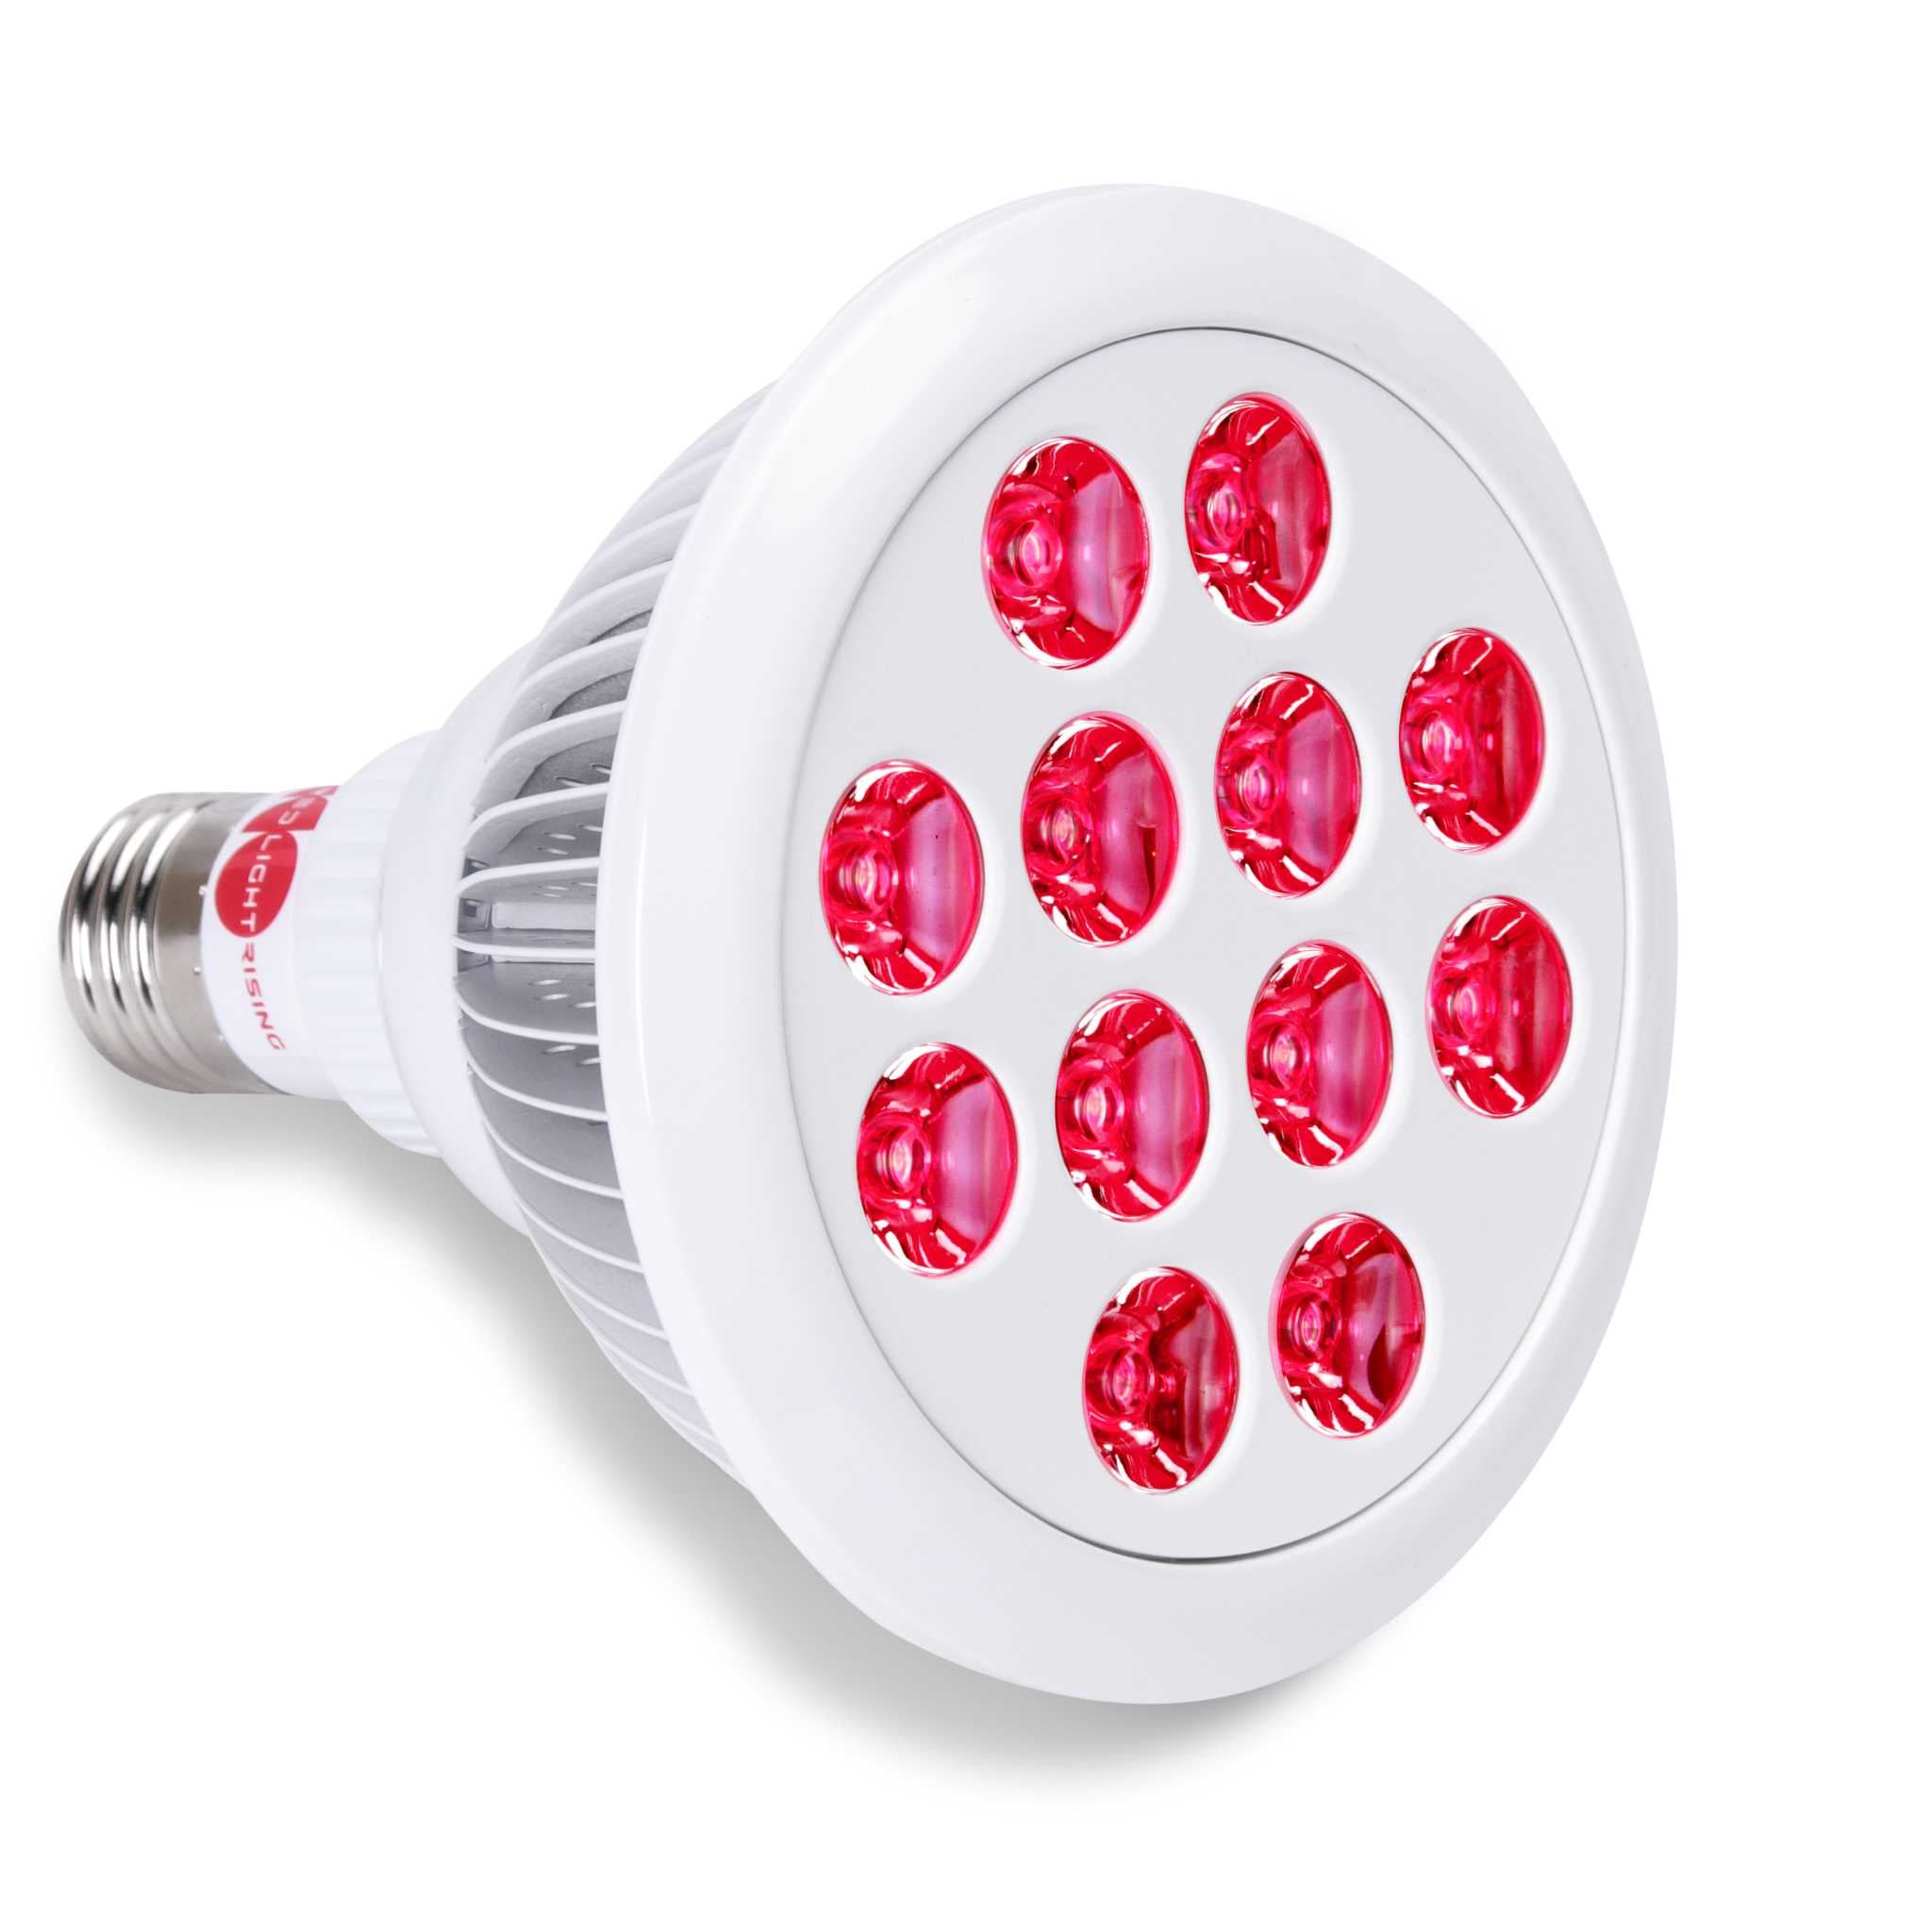 670nm red light therapy bulb for eye health